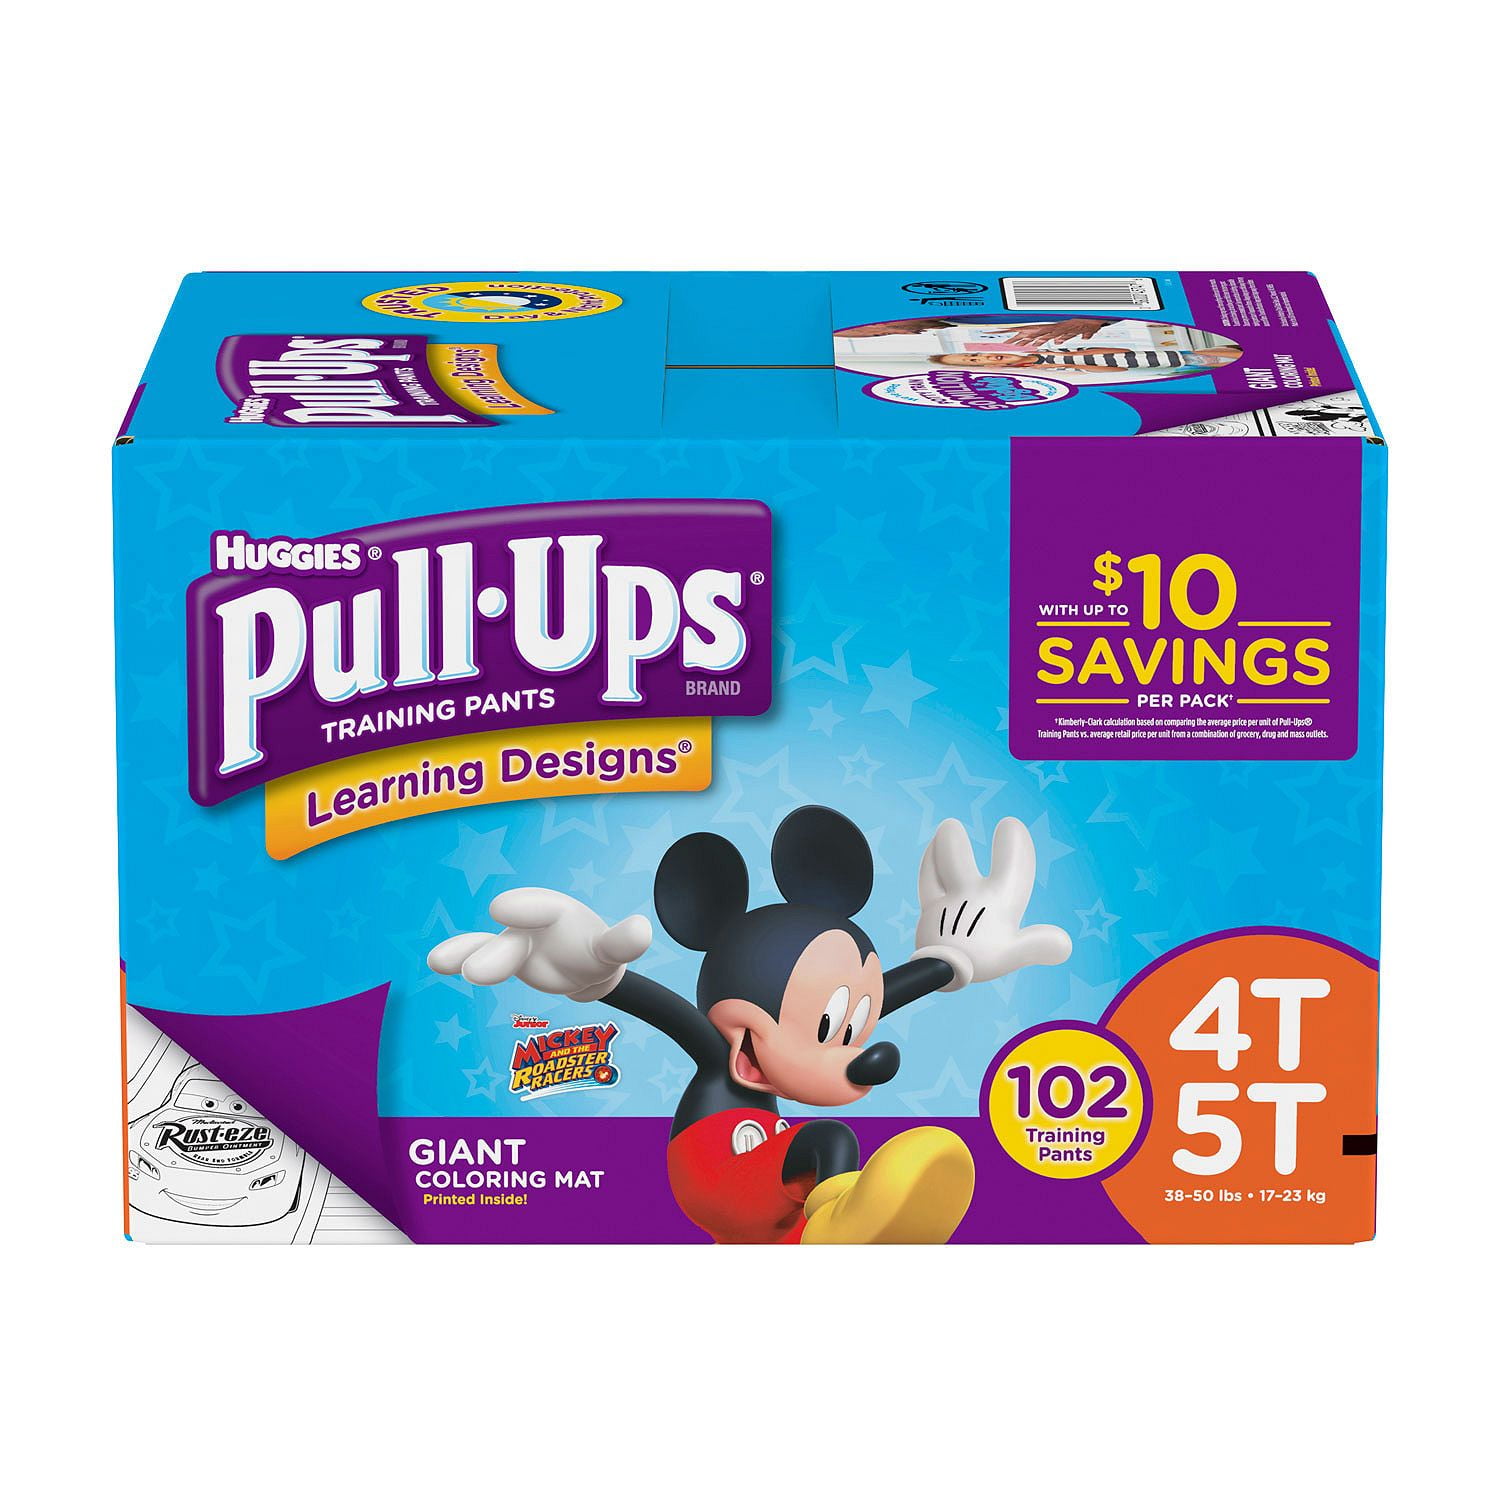 Pull-Ups Boys' Potty Training Pants, 4T-5T, 99 Count, 51% OFF